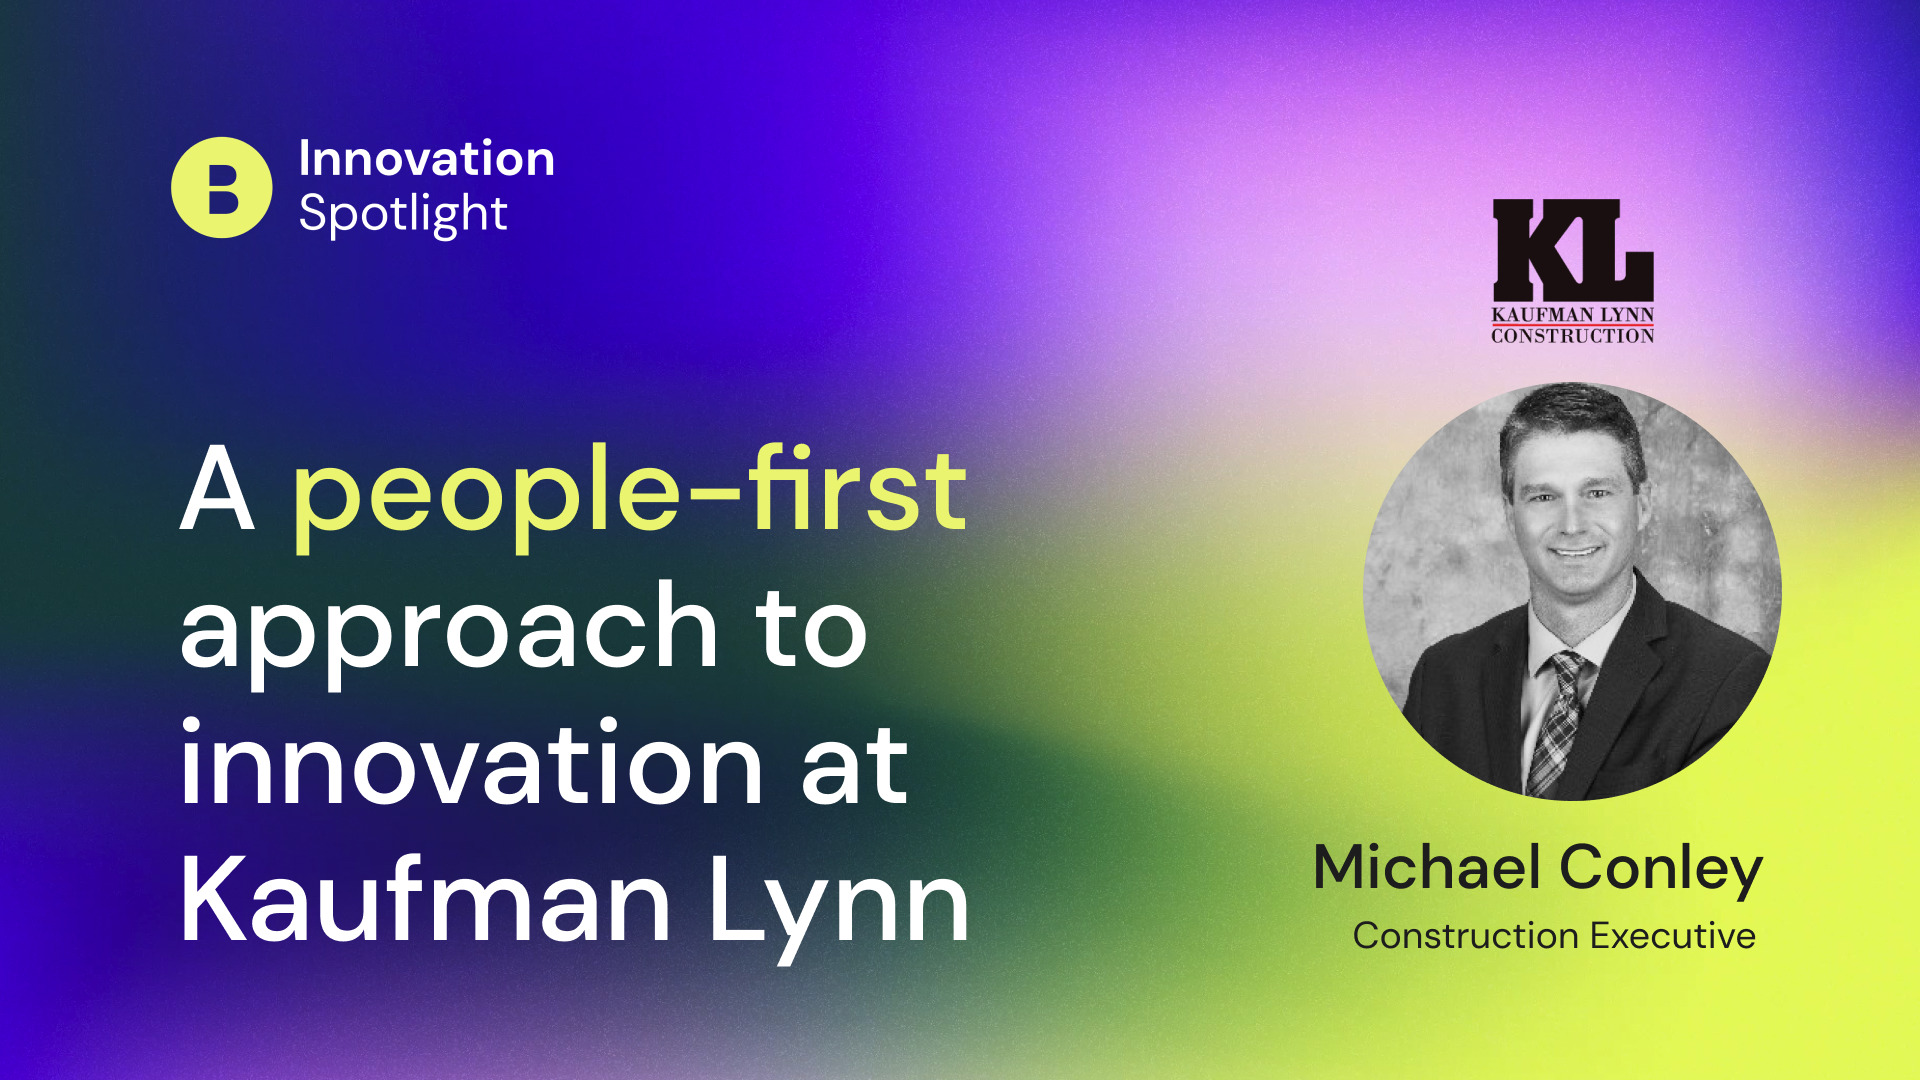 A people-first approach to innovation at Kaufman Lynn